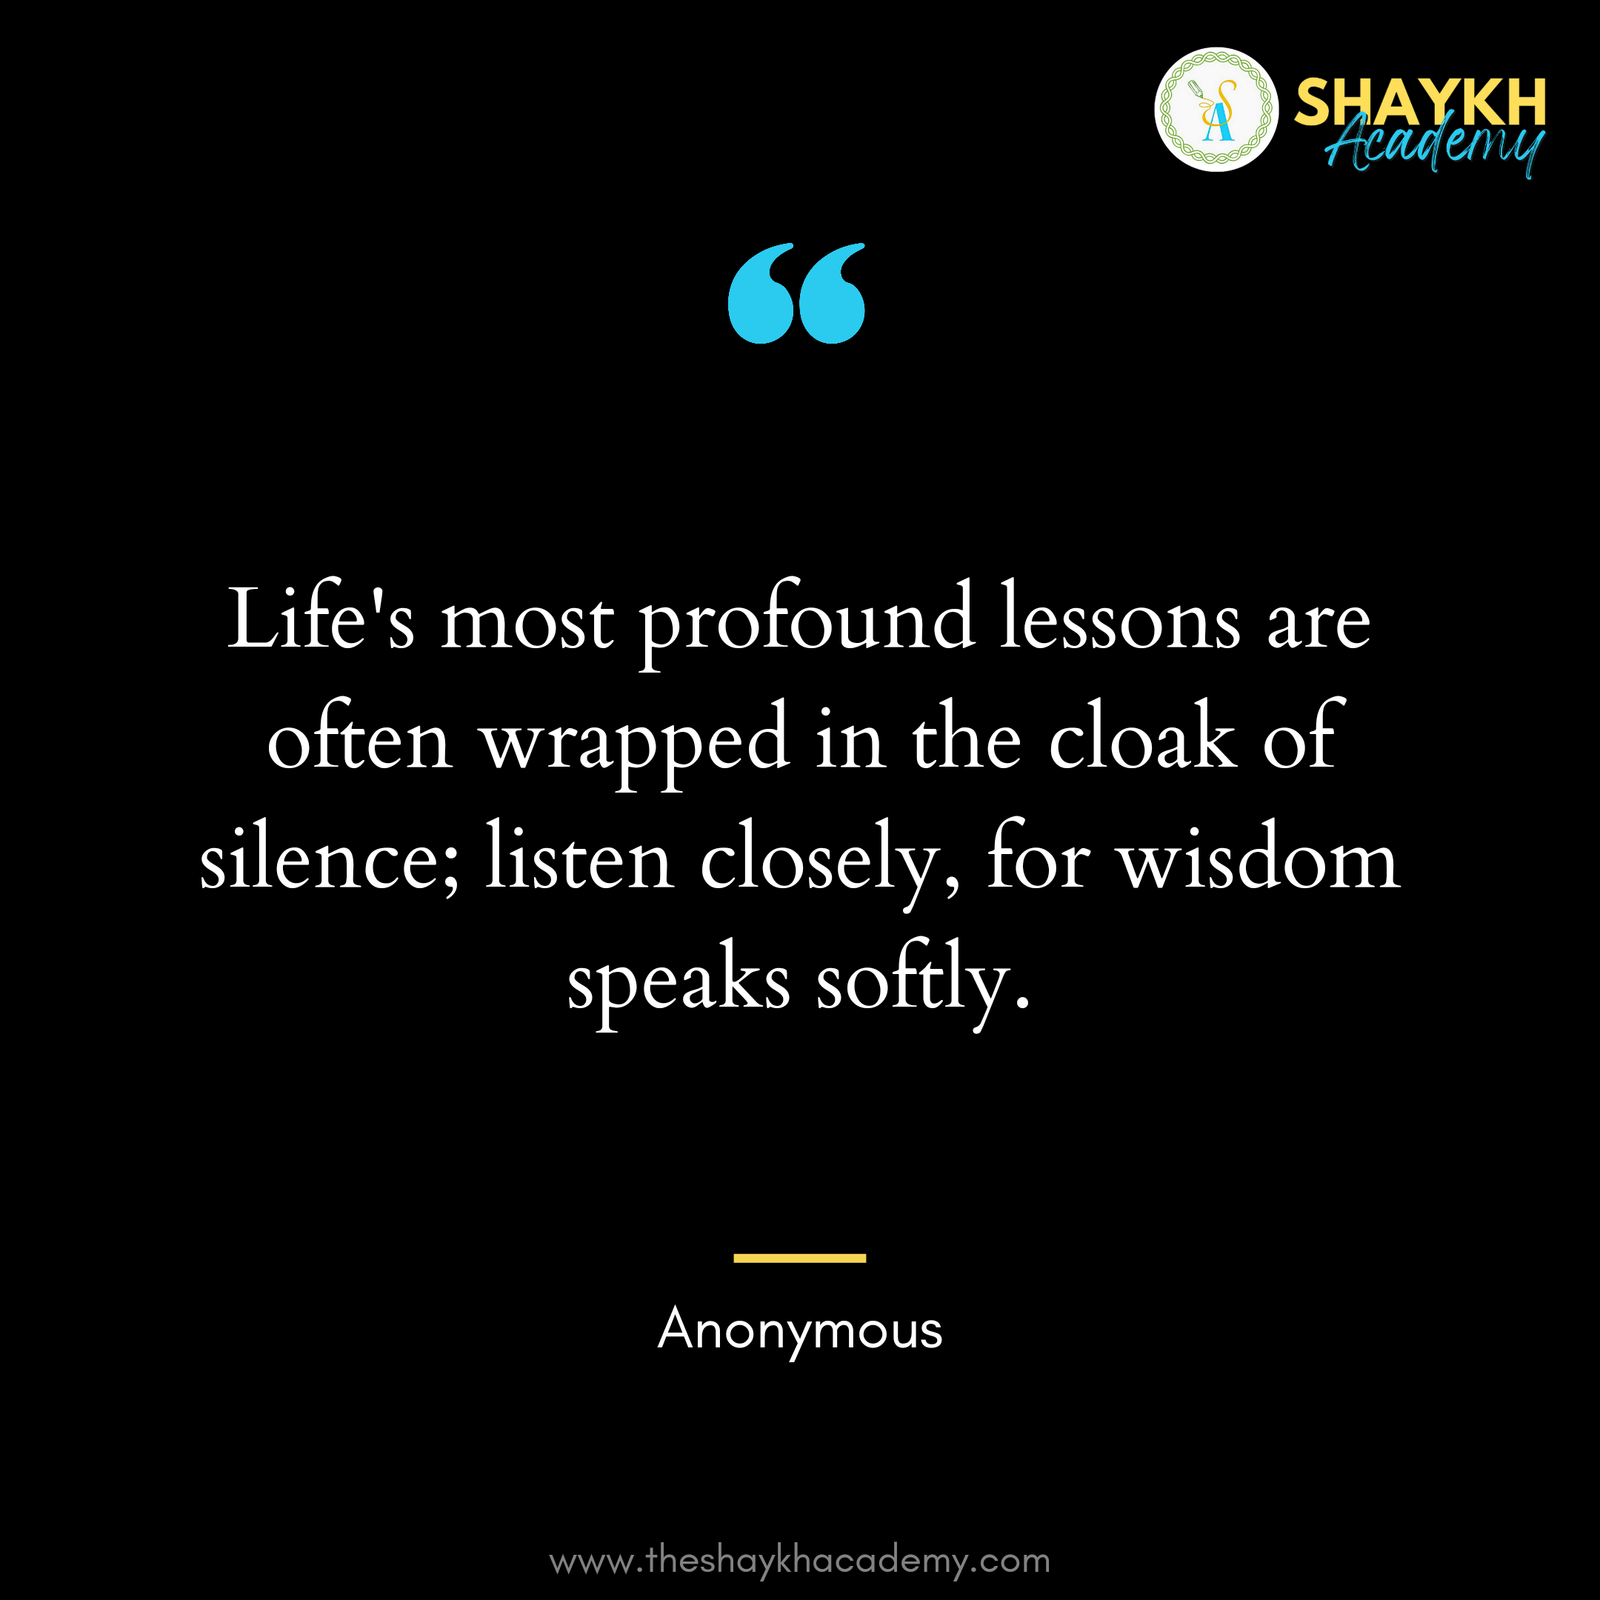 Life's most profound lessons are often wrapped in the cloak of silence; listen closely, for wisdom speaks softly.